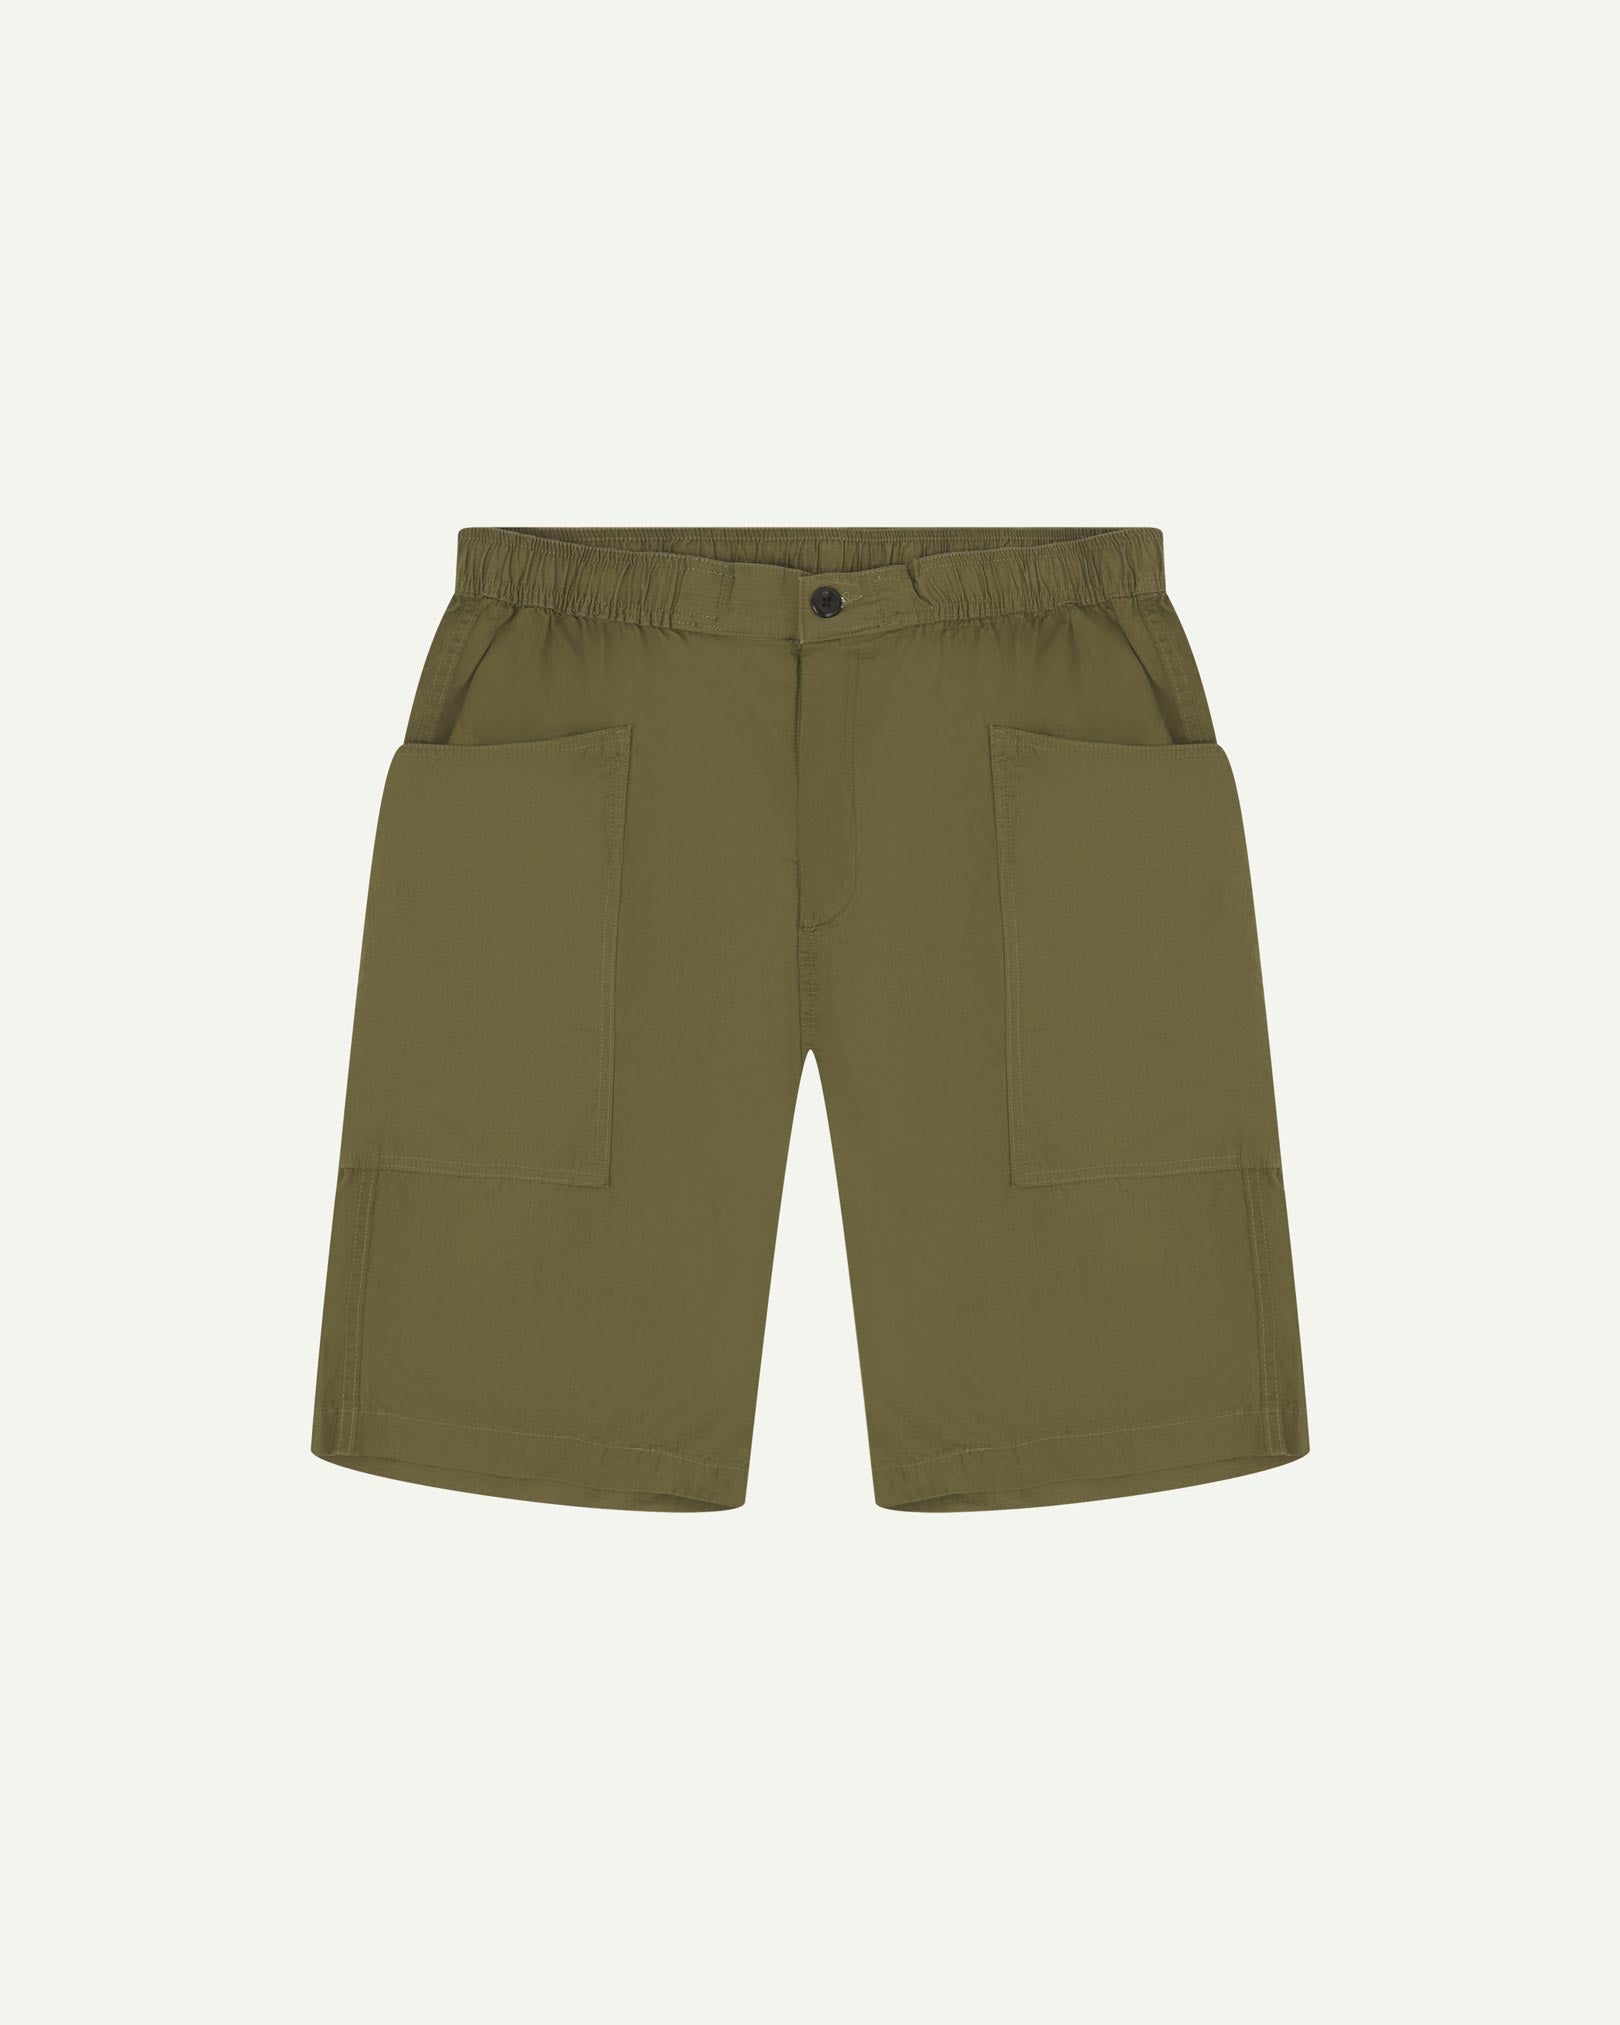 Front flat view of olive-green organic cotton #5015 lightweight cotton shorts by Uskees. Clear view of drawstring and deep front pockets.